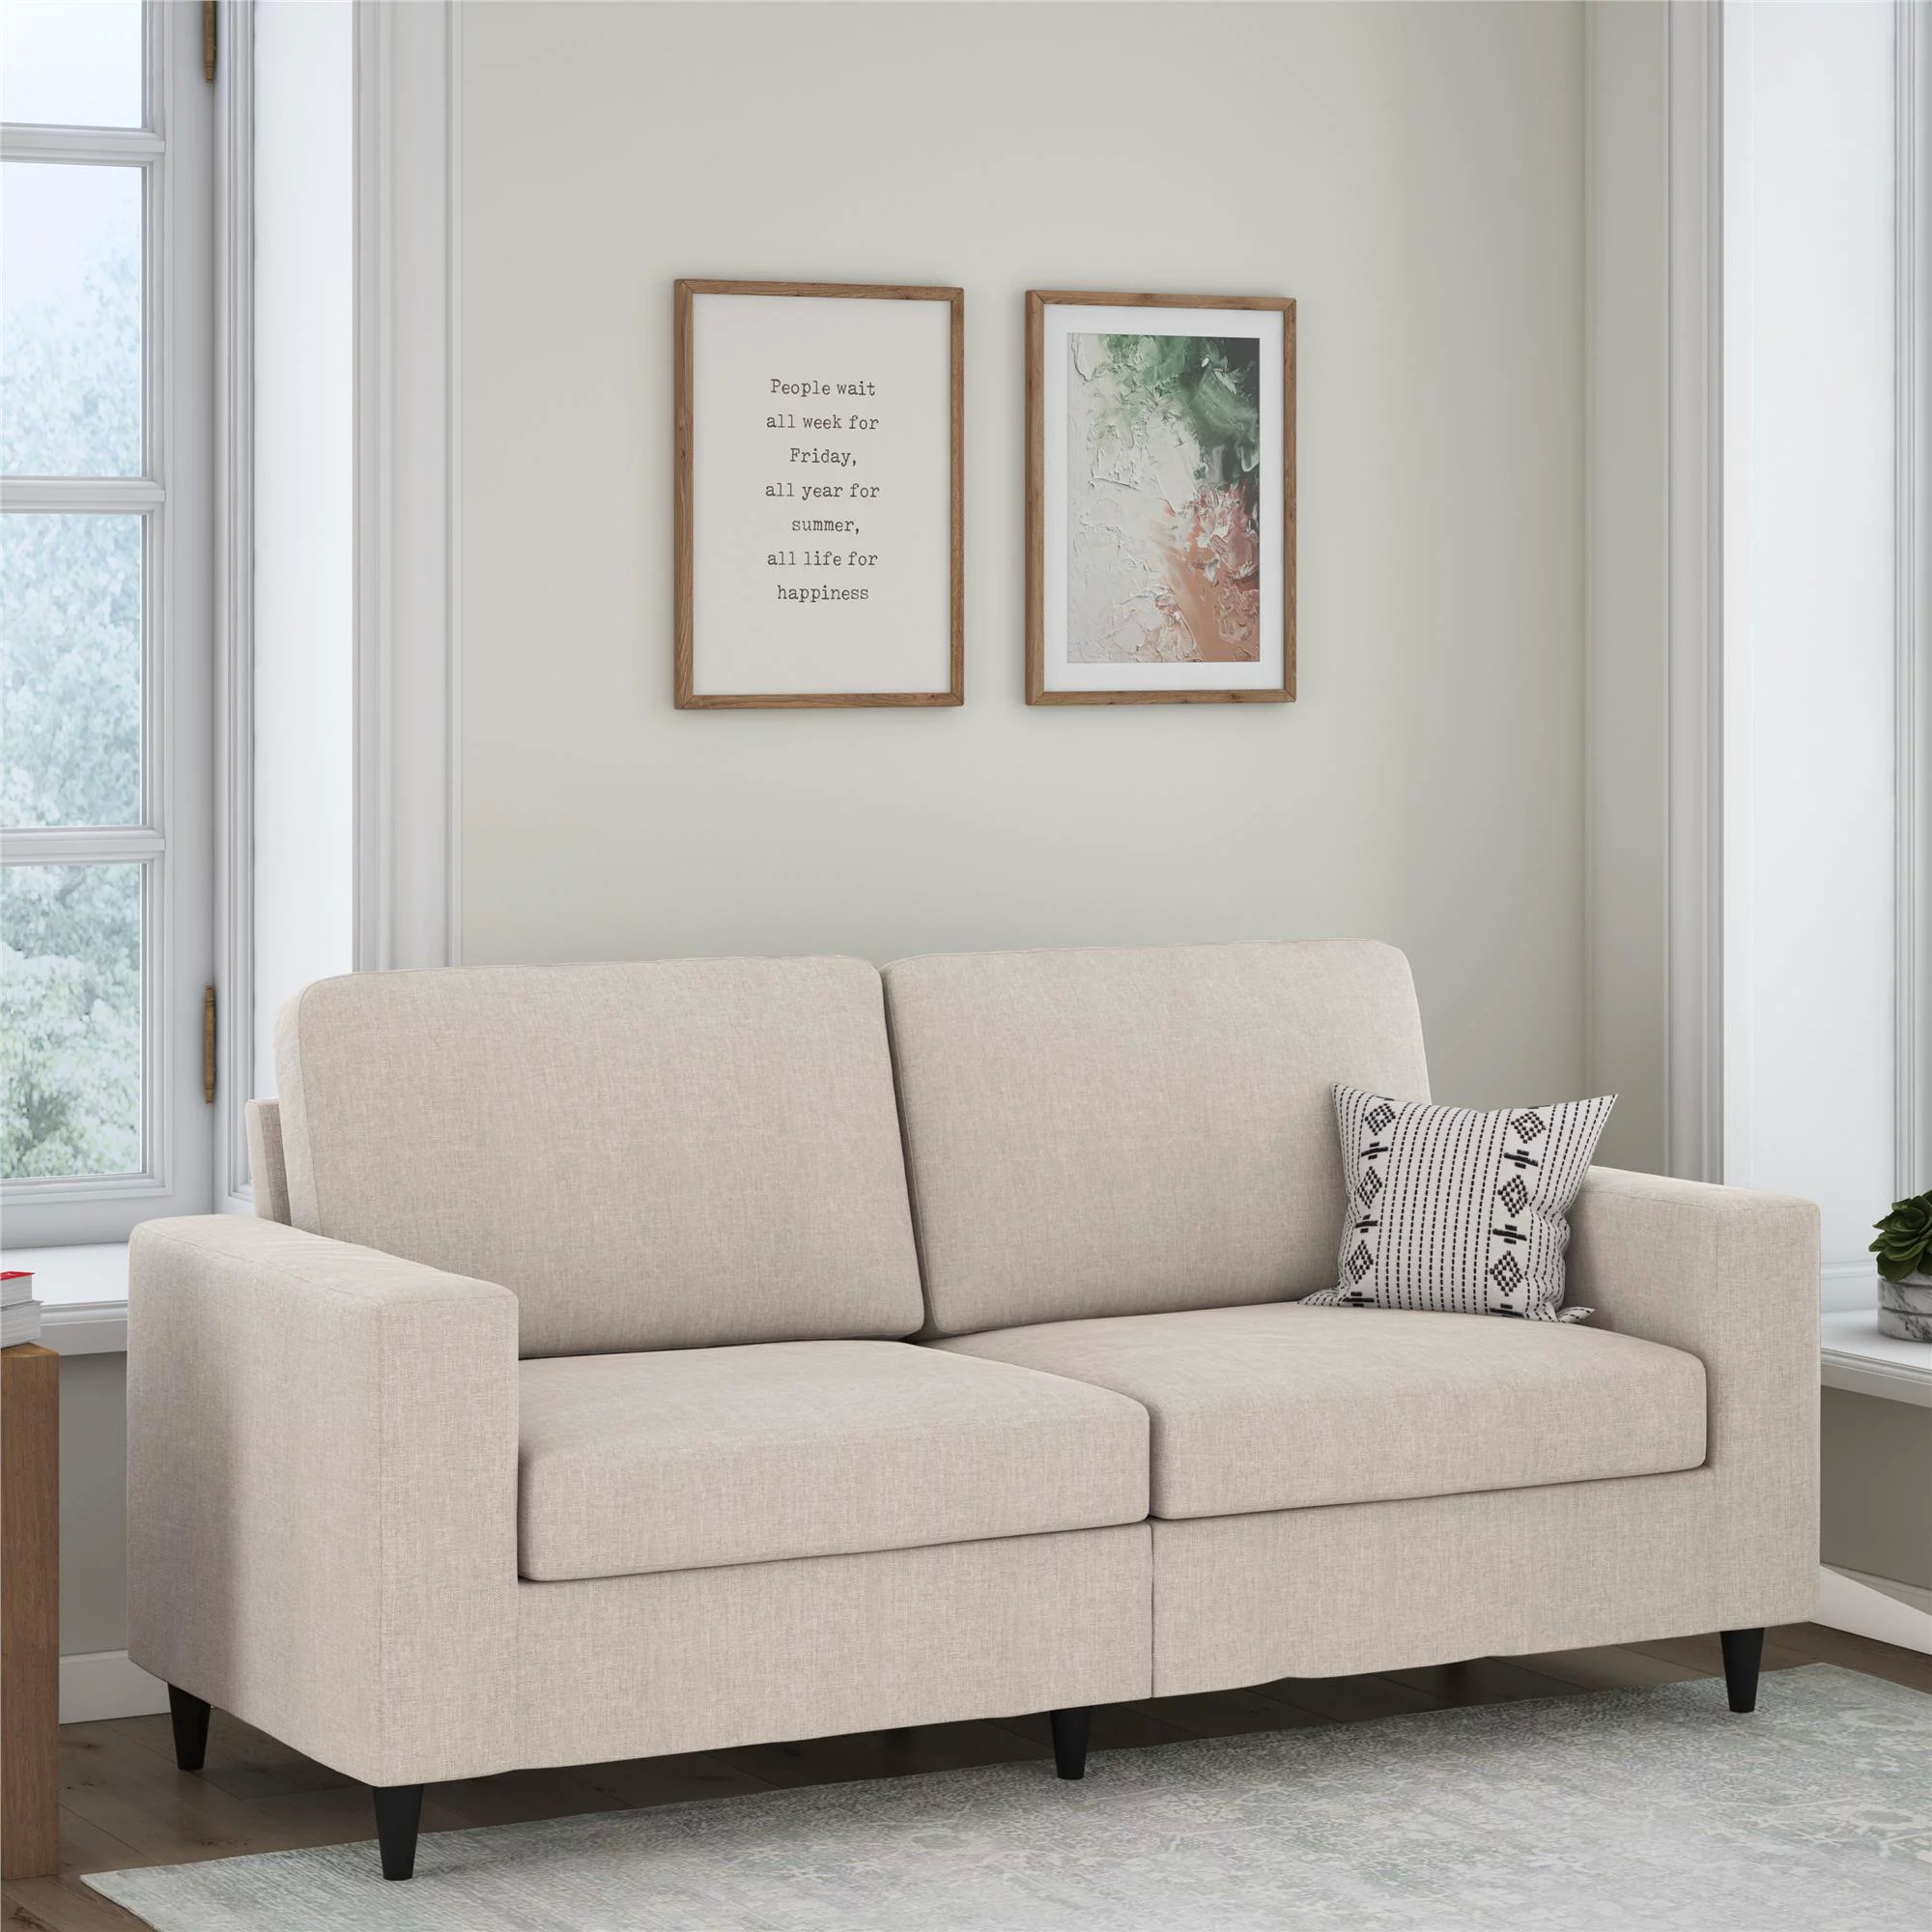 75" DHP Cooper 3-Seater Sofa (various colors) $198 + Free Shipping